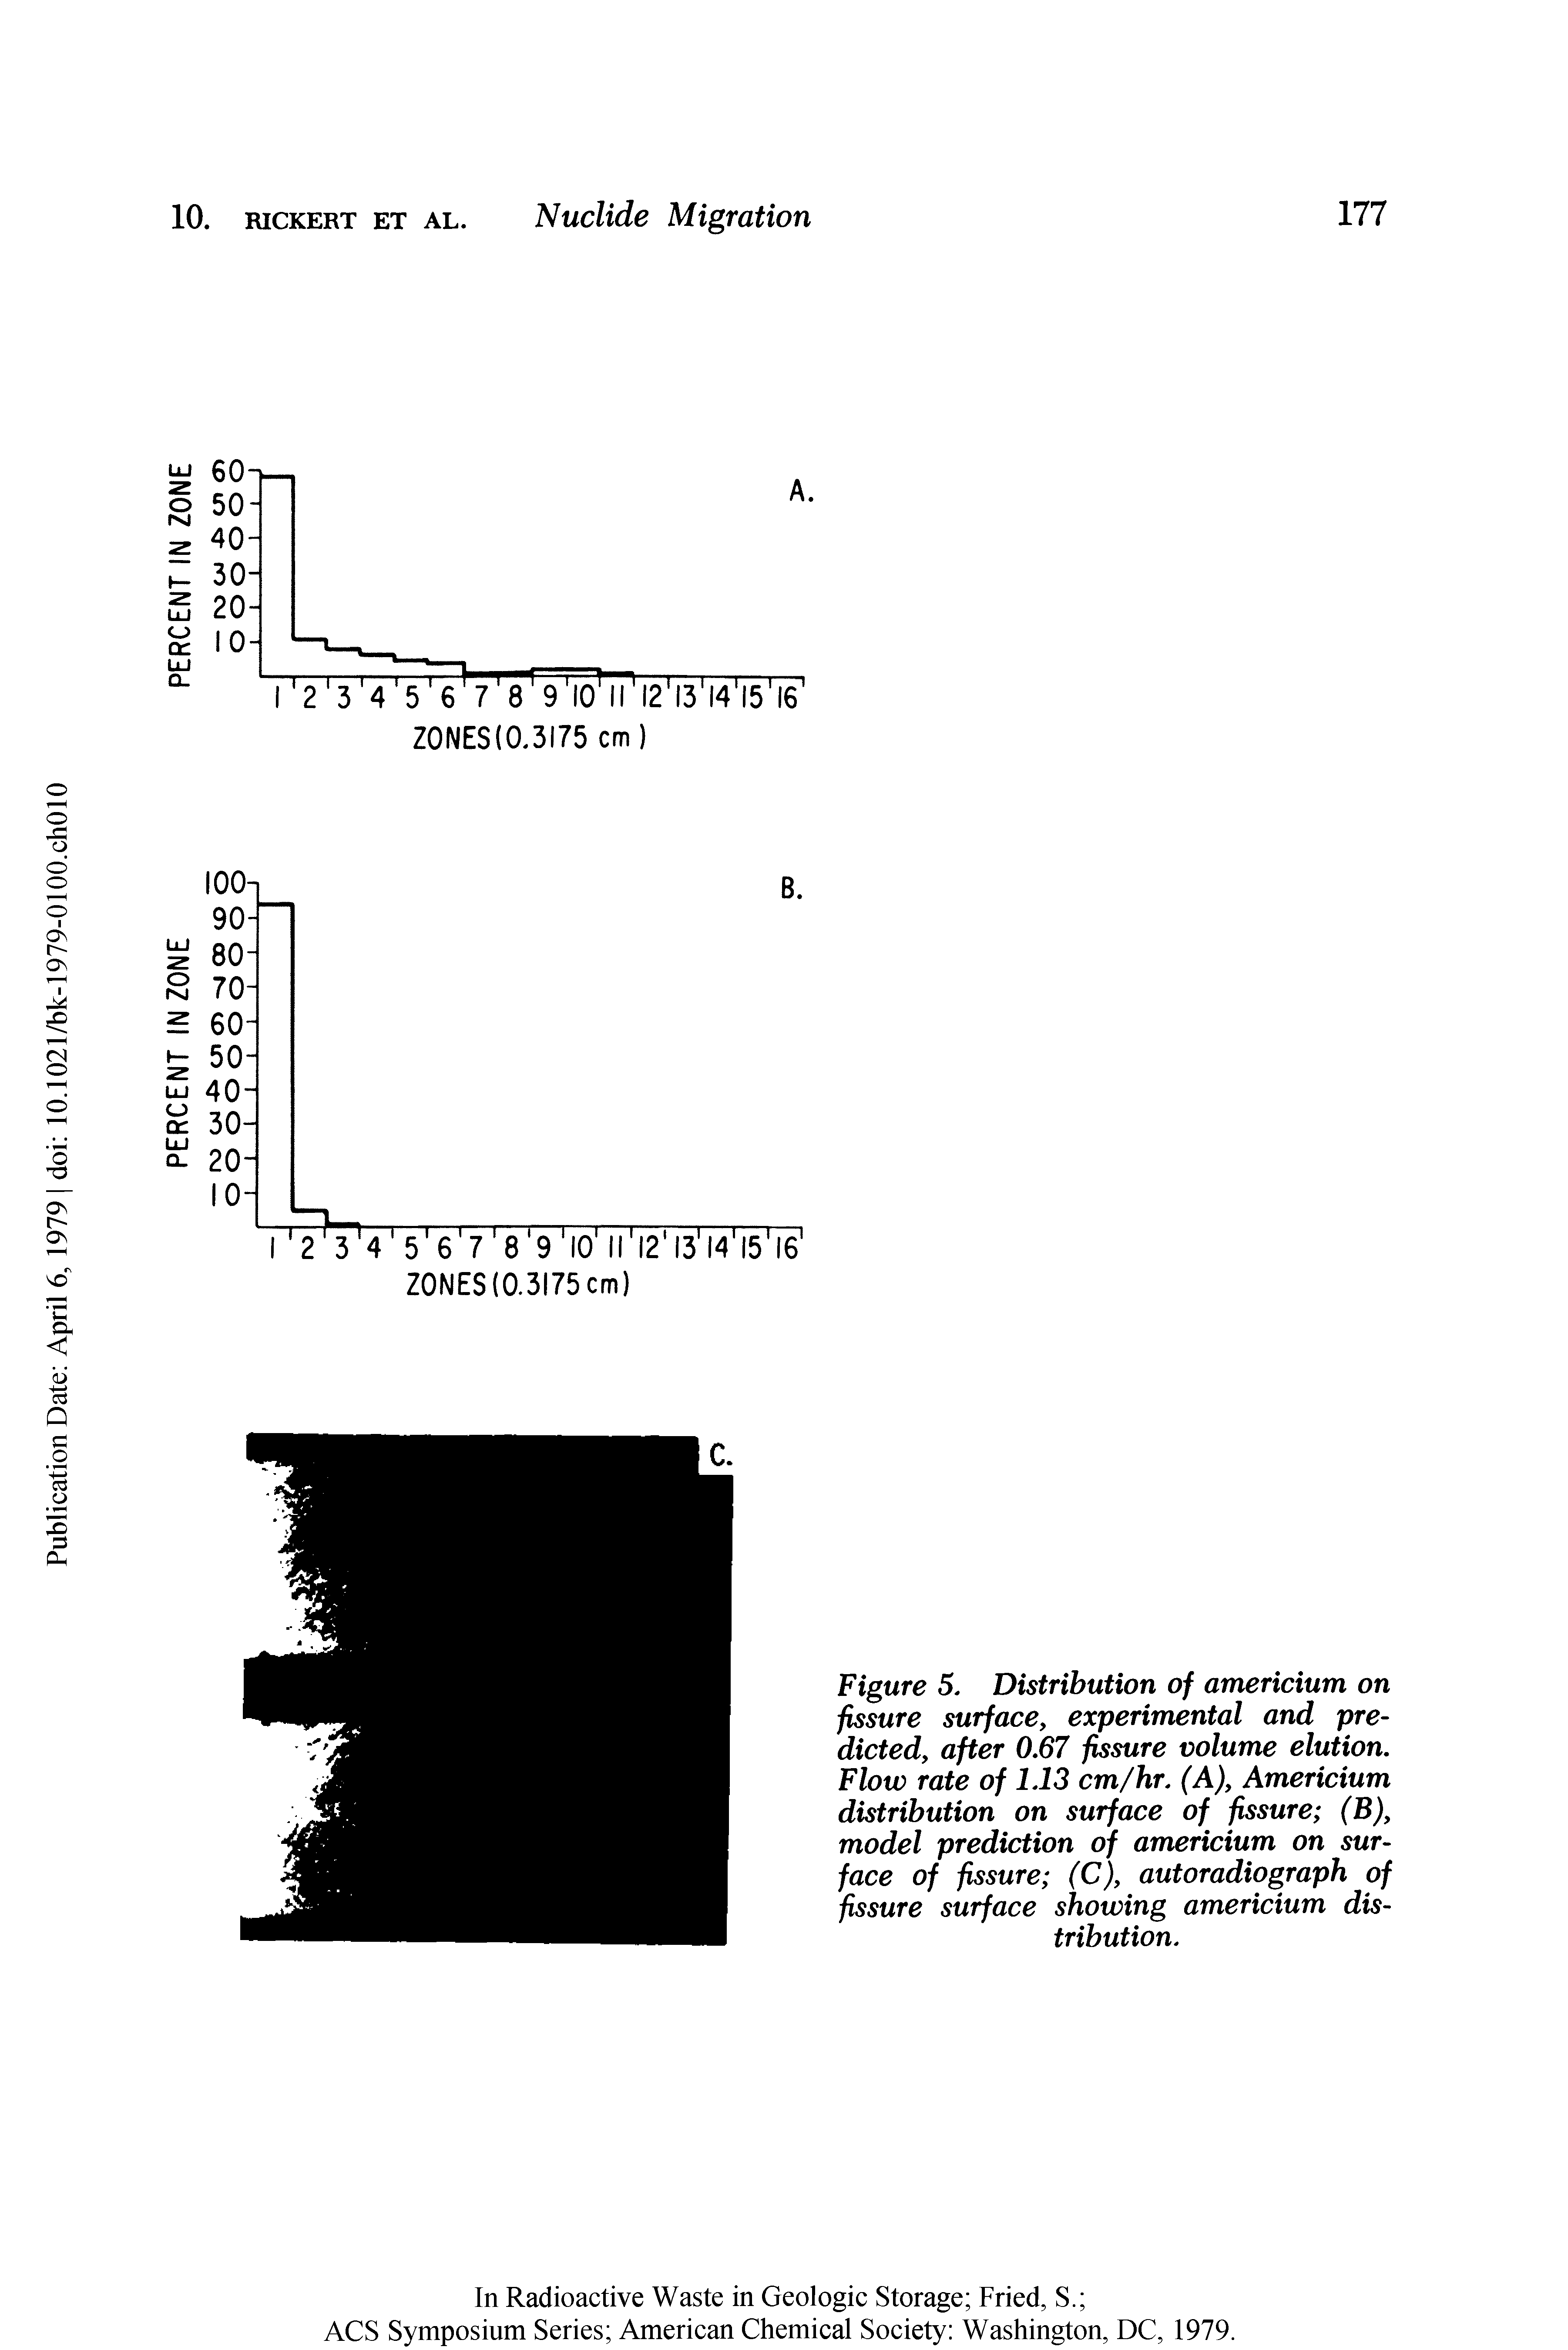 Figure 5. Distribution of americium on fissure surface, experimental and predicted, after 0.67 fissure volume elution. Flow rate of 1.13 cm/hr. (A), Americium distribution on surface of fissure (B), model prediction of americium on surface of fissure (C), autoradiograph of fissure surface showing americium distribution.